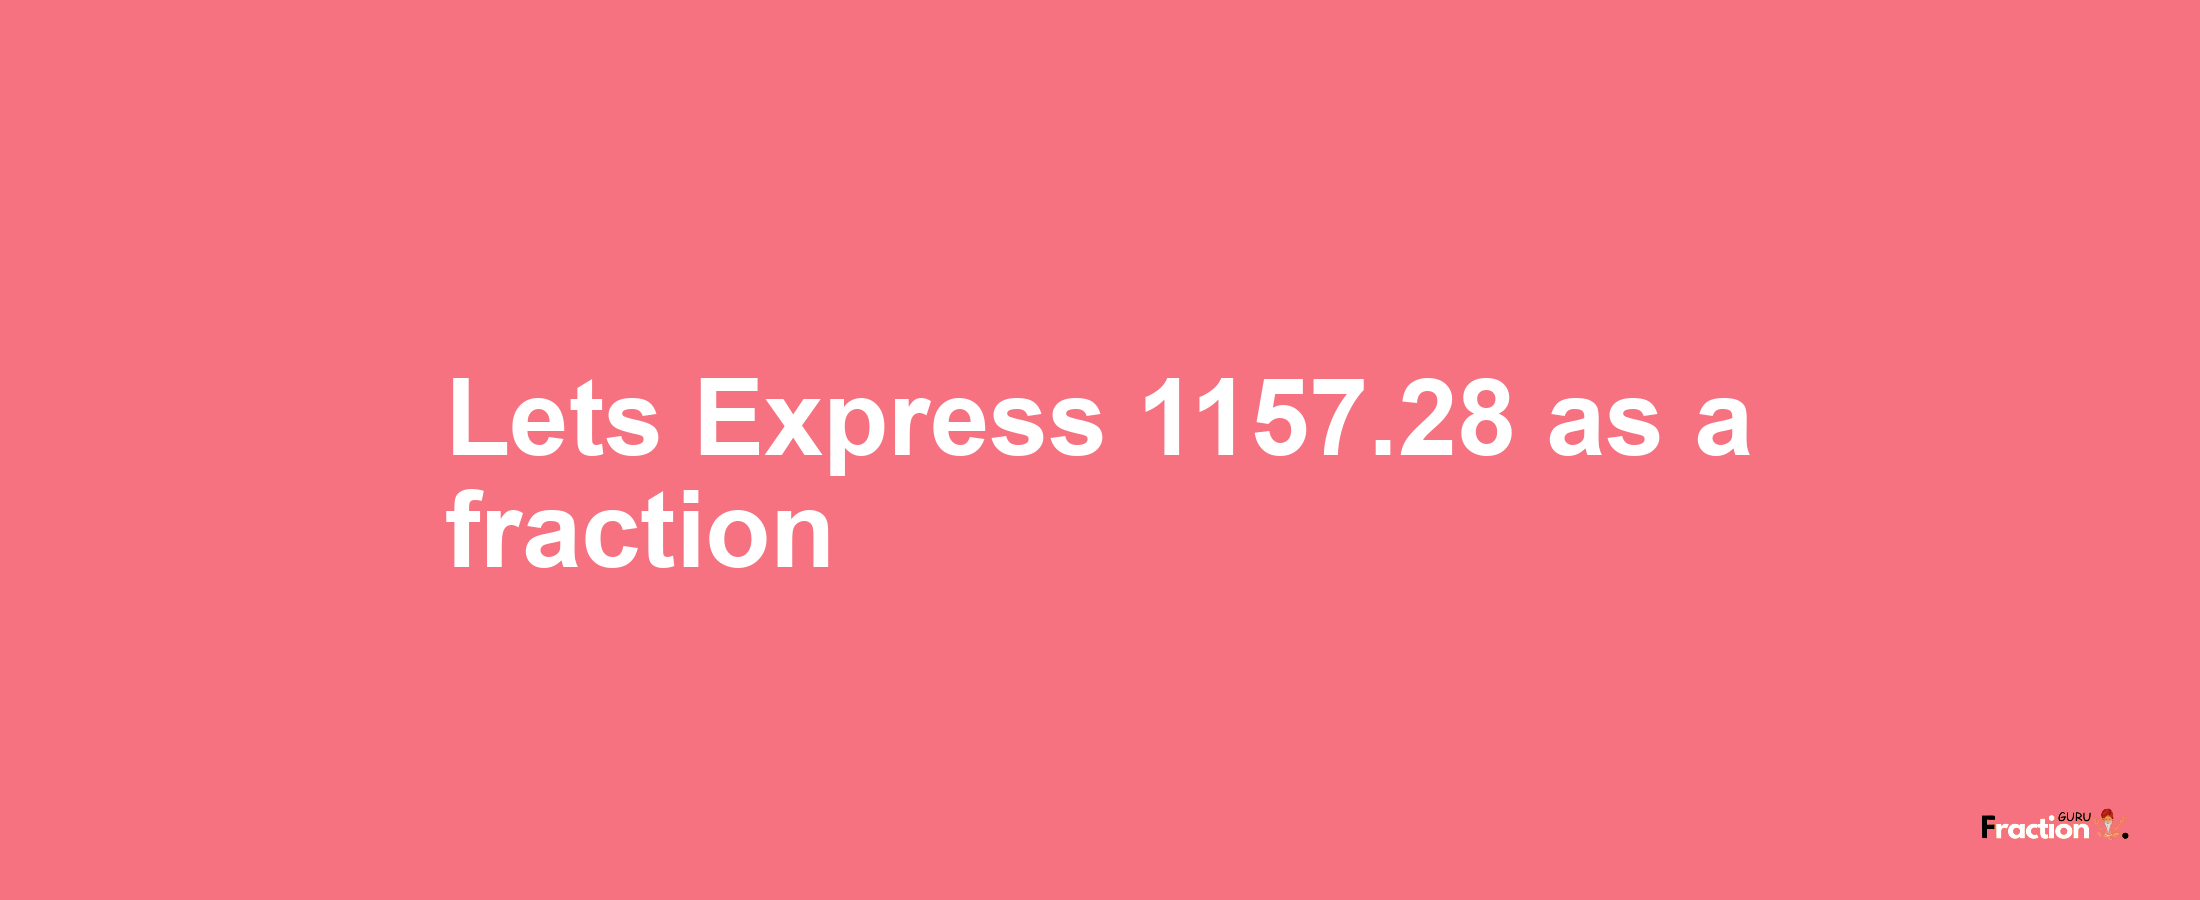 Lets Express 1157.28 as afraction